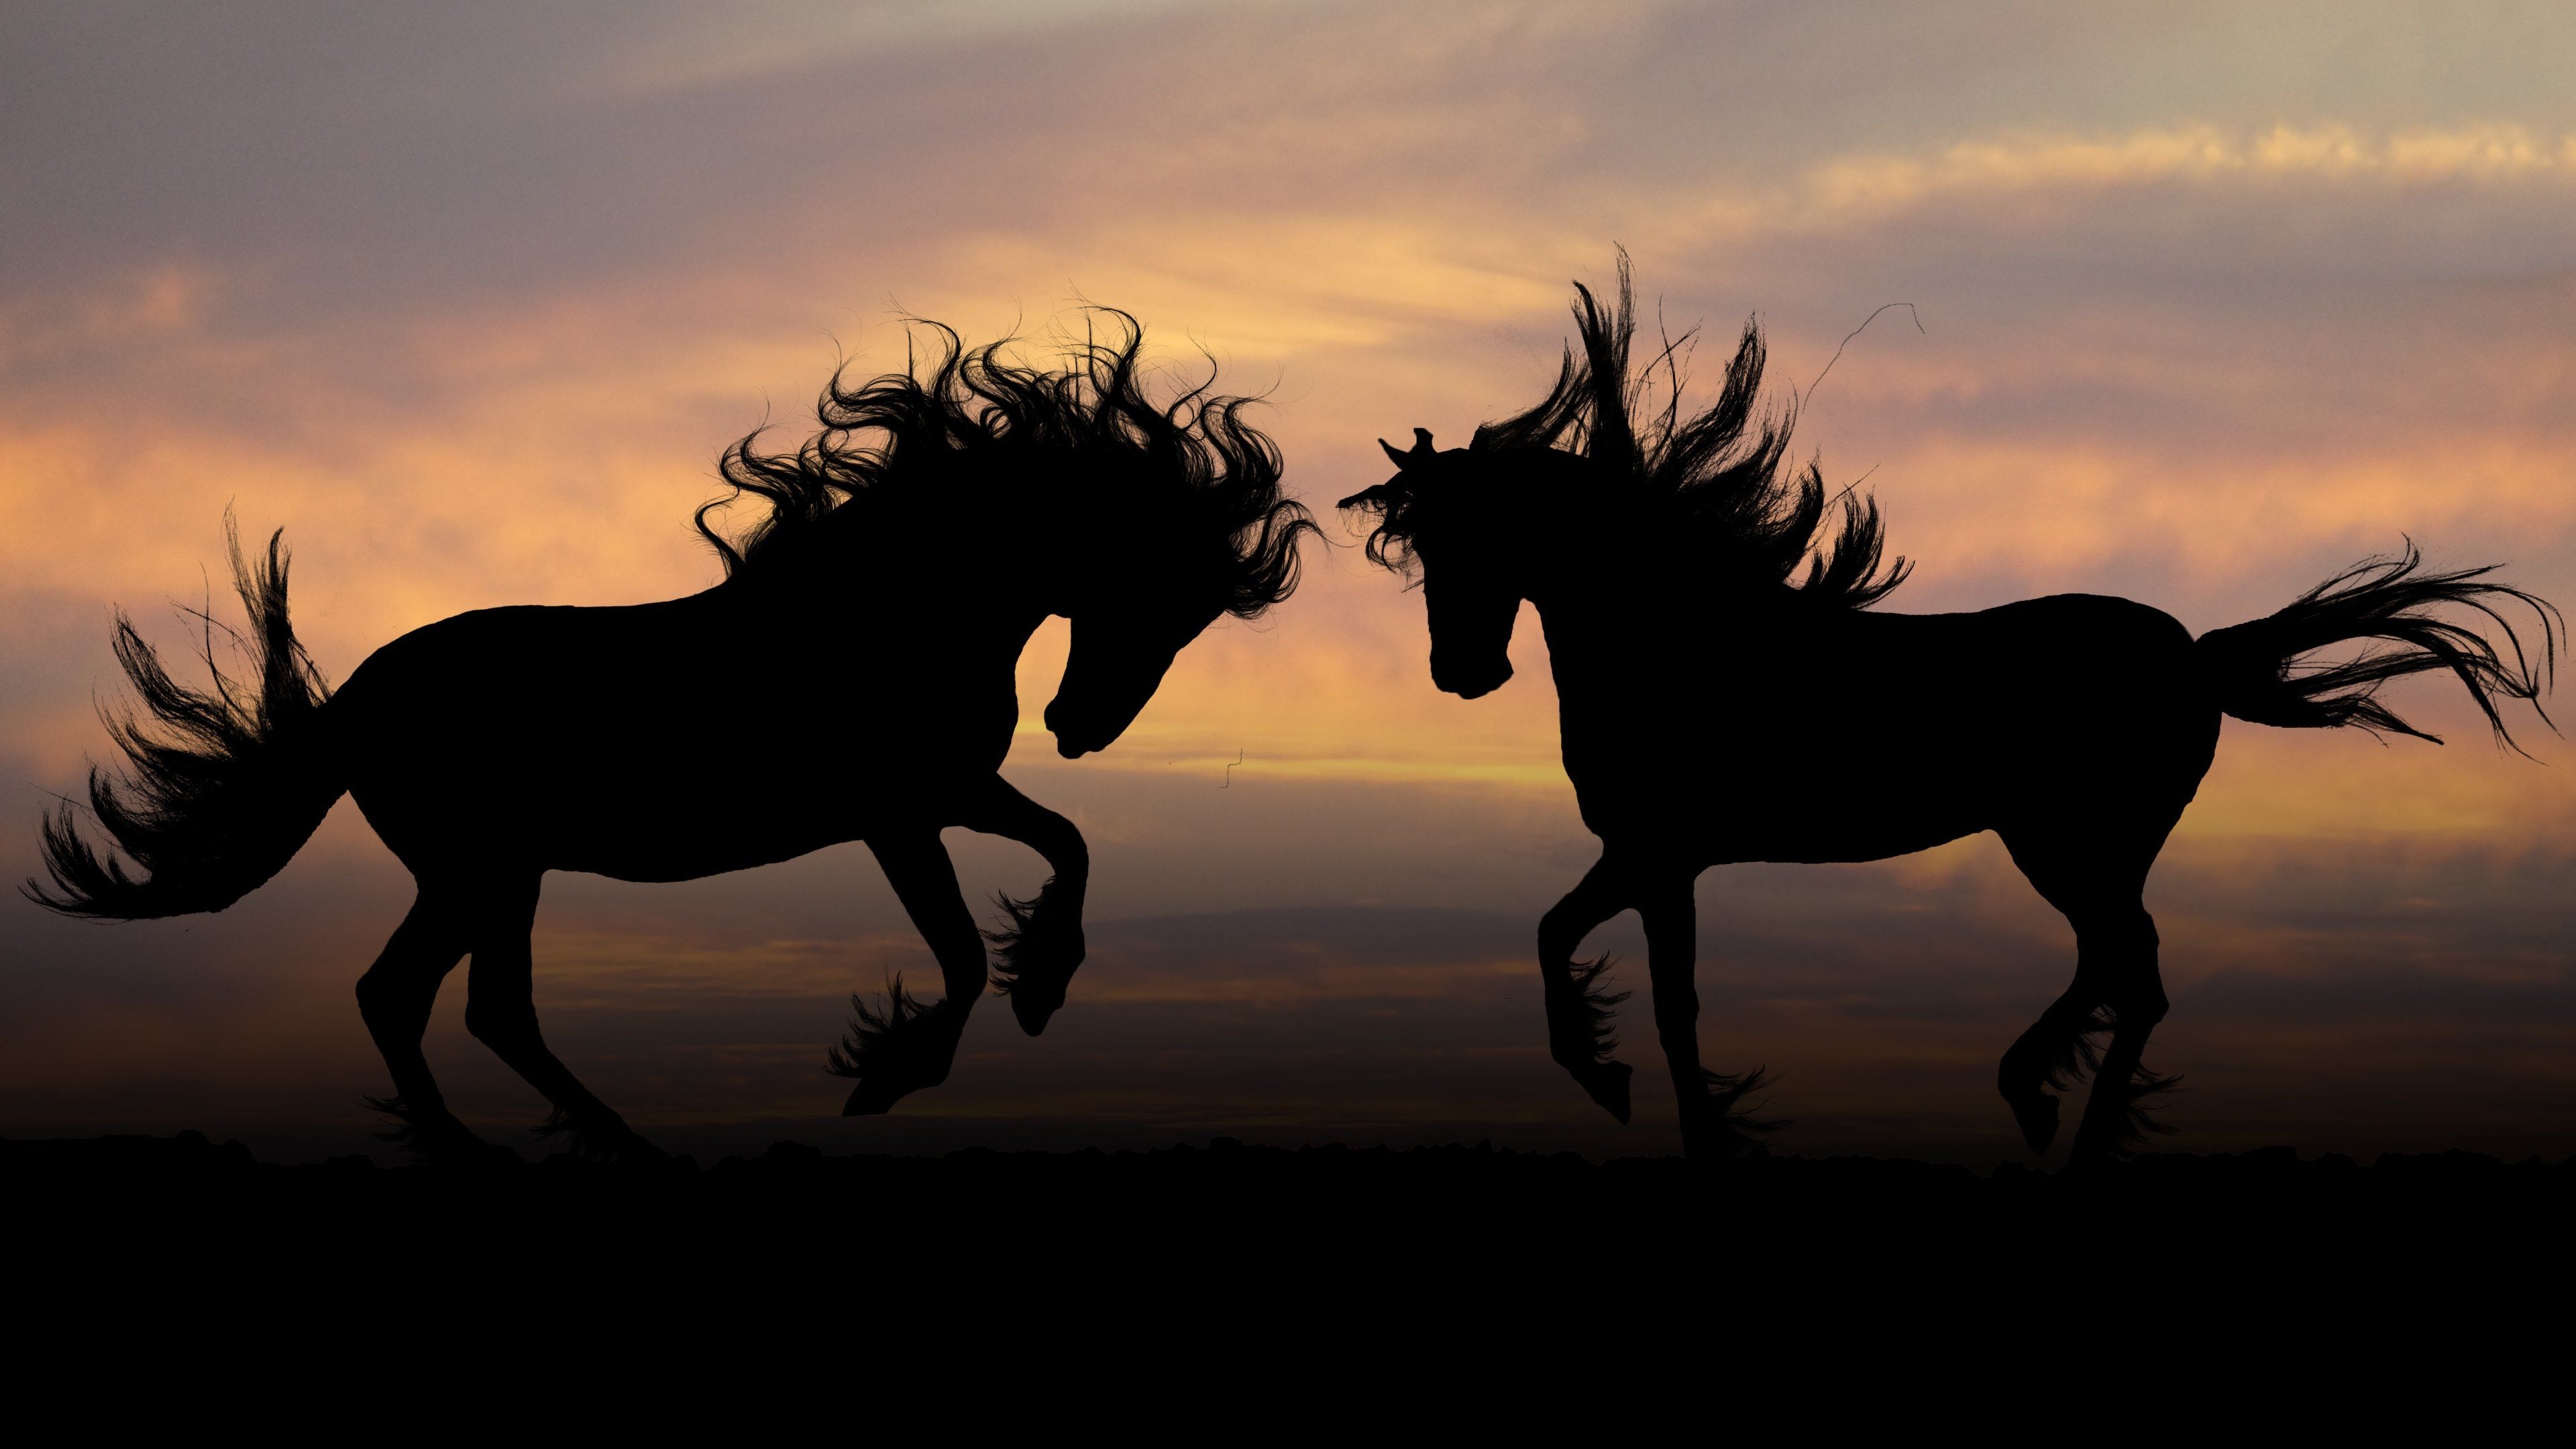 Horse: Family Equidae, Silhouettes, Working animal. 3840x2160 4K Background.